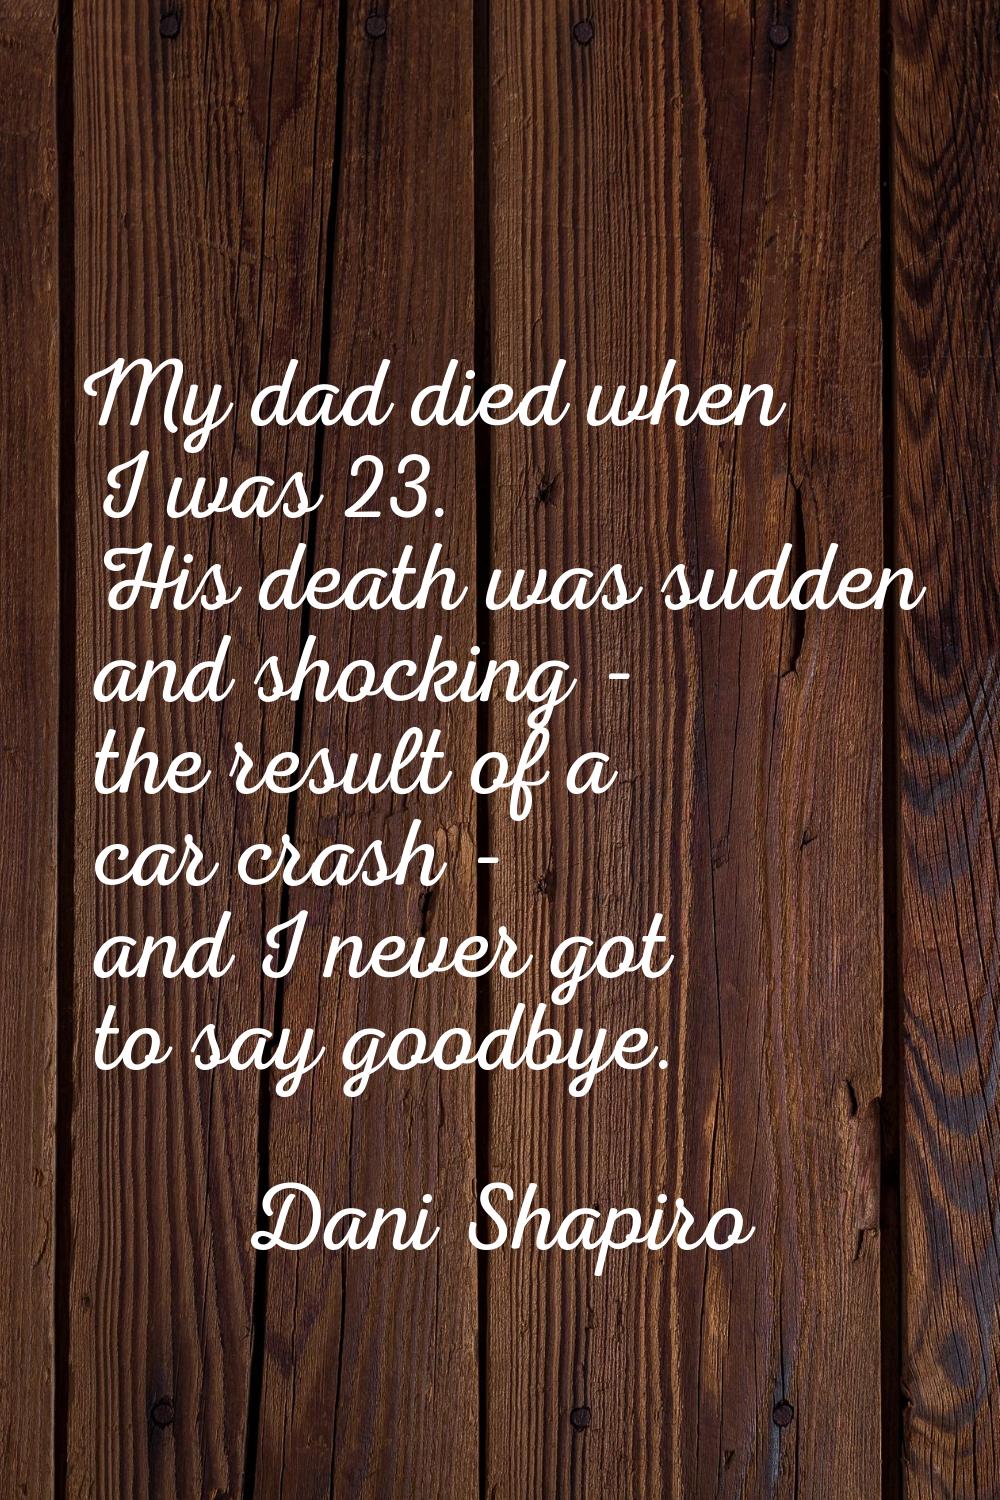 My dad died when I was 23. His death was sudden and shocking - the result of a car crash - and I ne